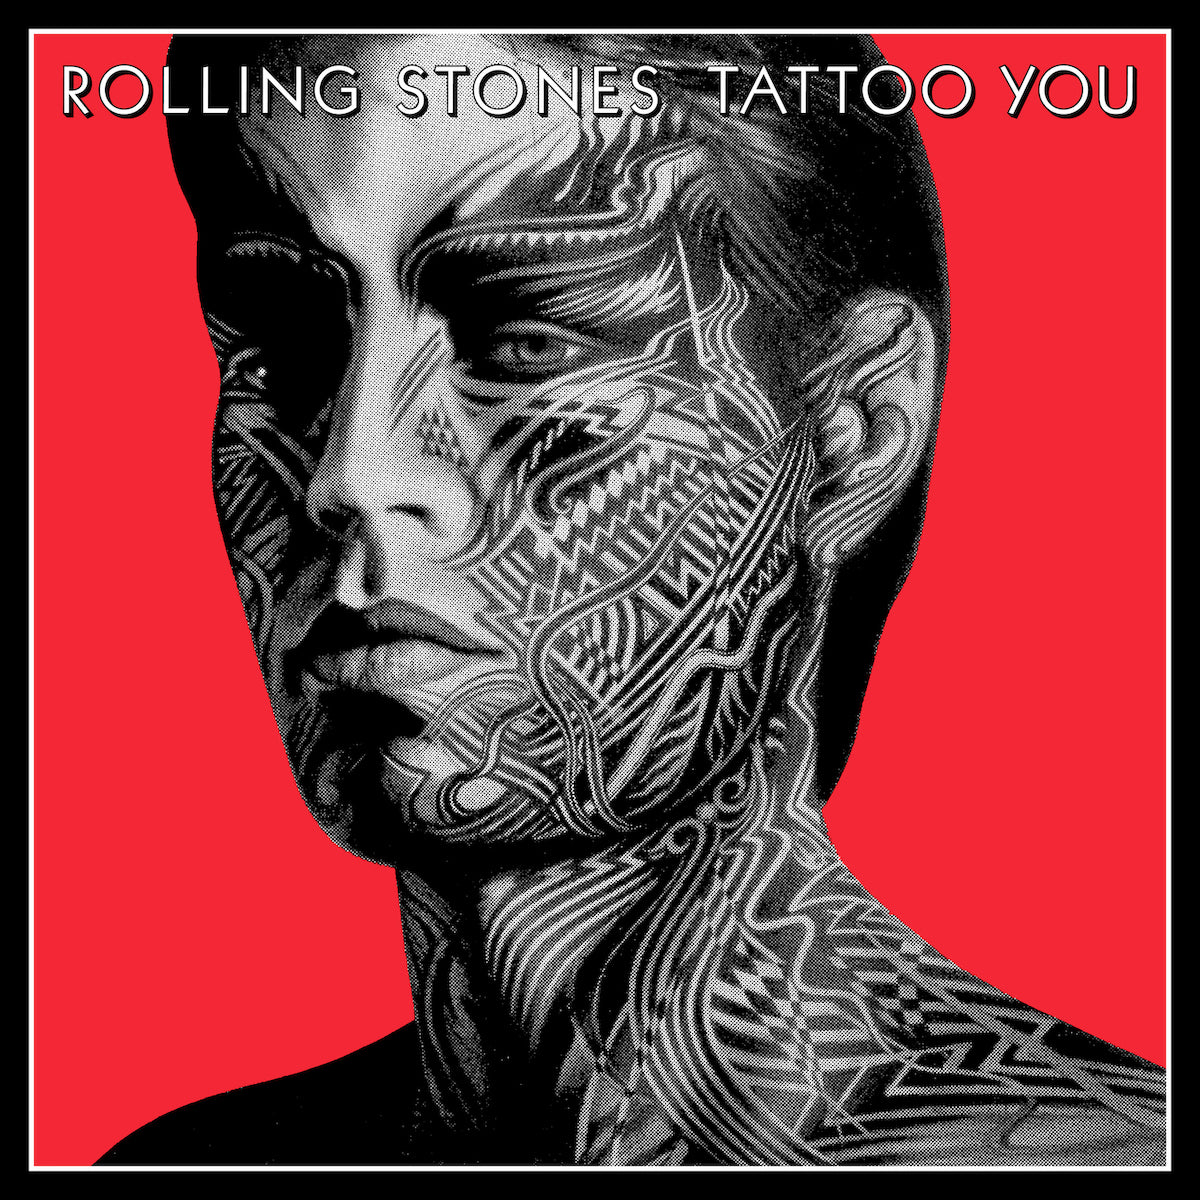 Los Rolling Stones - Tattoo You (2021 Remaster)